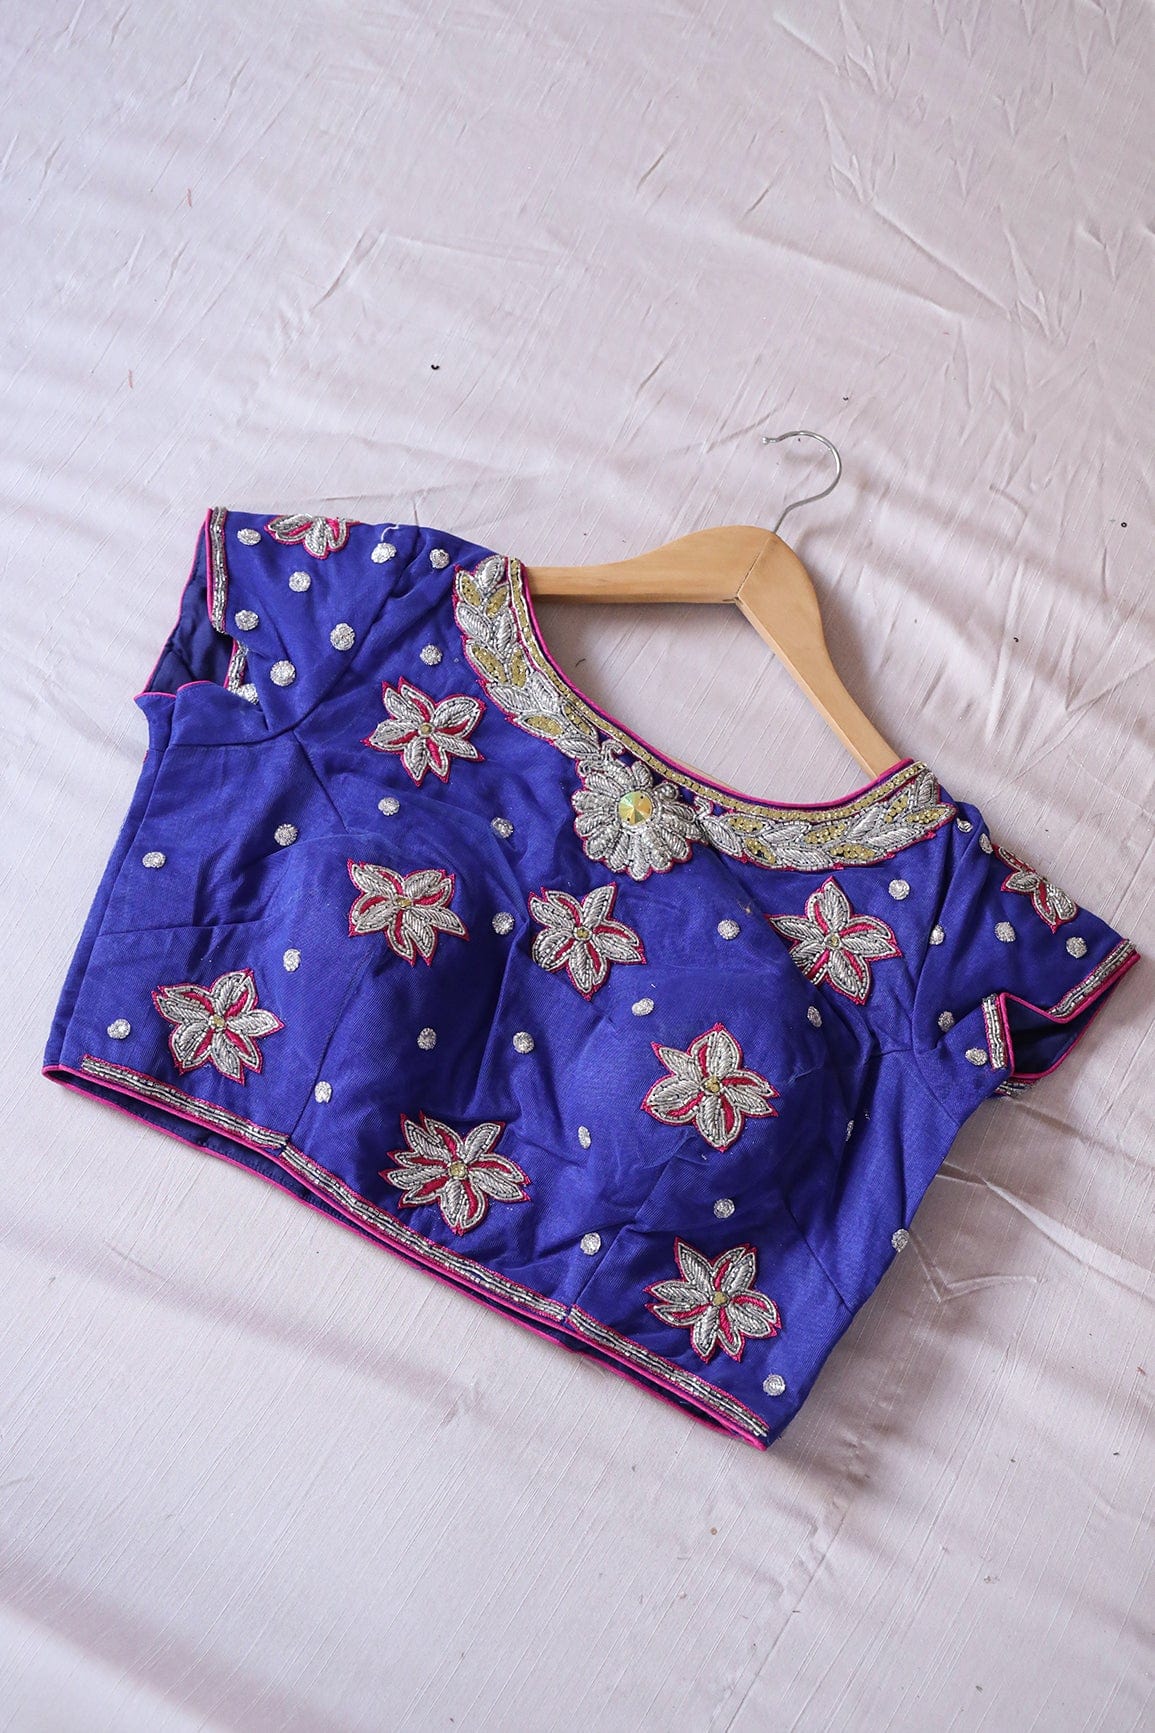 doeraa Blouse Royal Blue Hand Work Embroidery Net Stitched Blouse